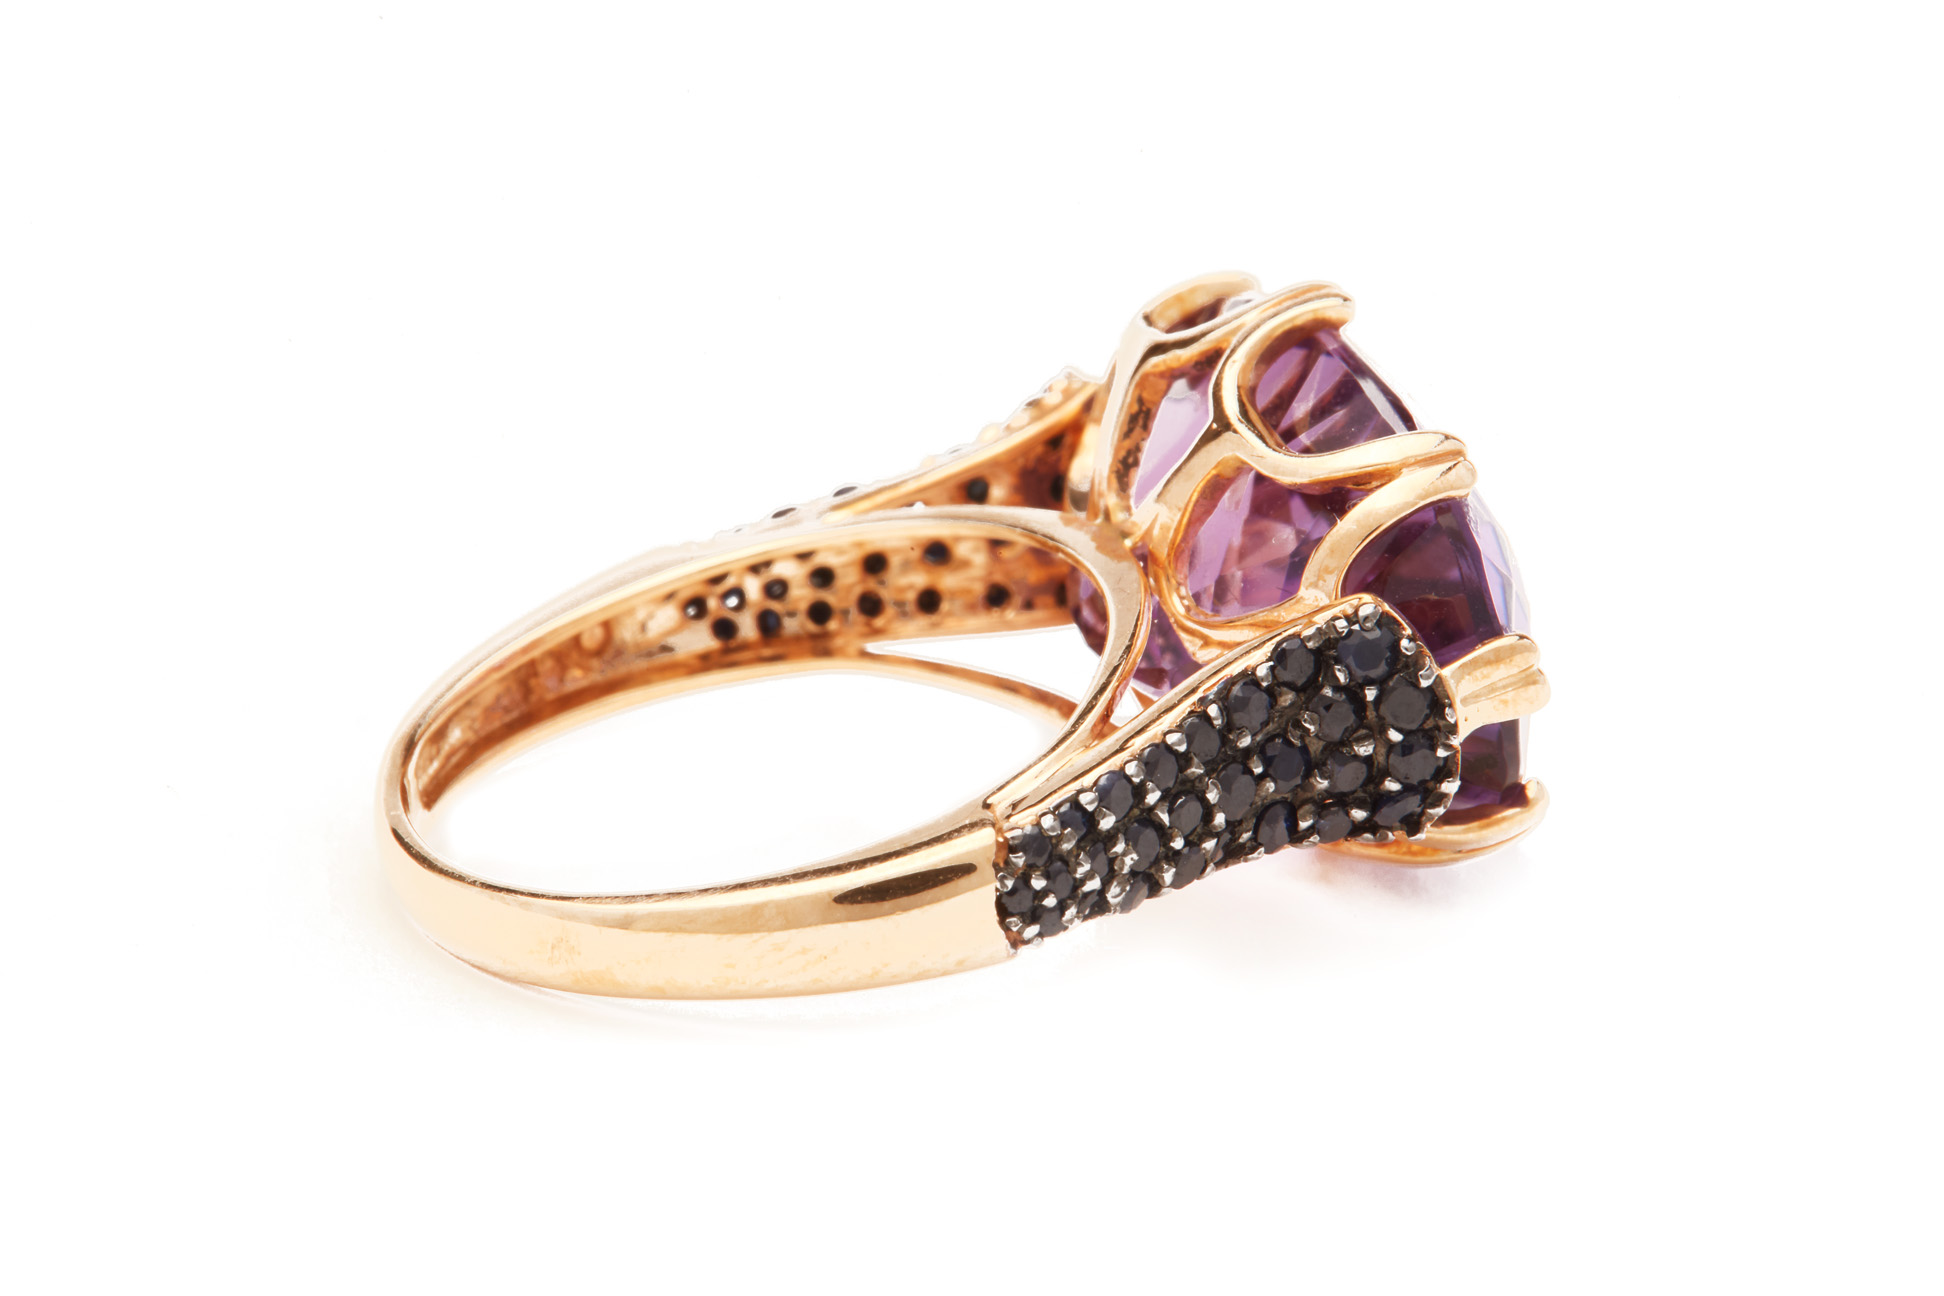 AN AMETHYST AND BLACK SAPPHIRE RING - Image 3 of 3